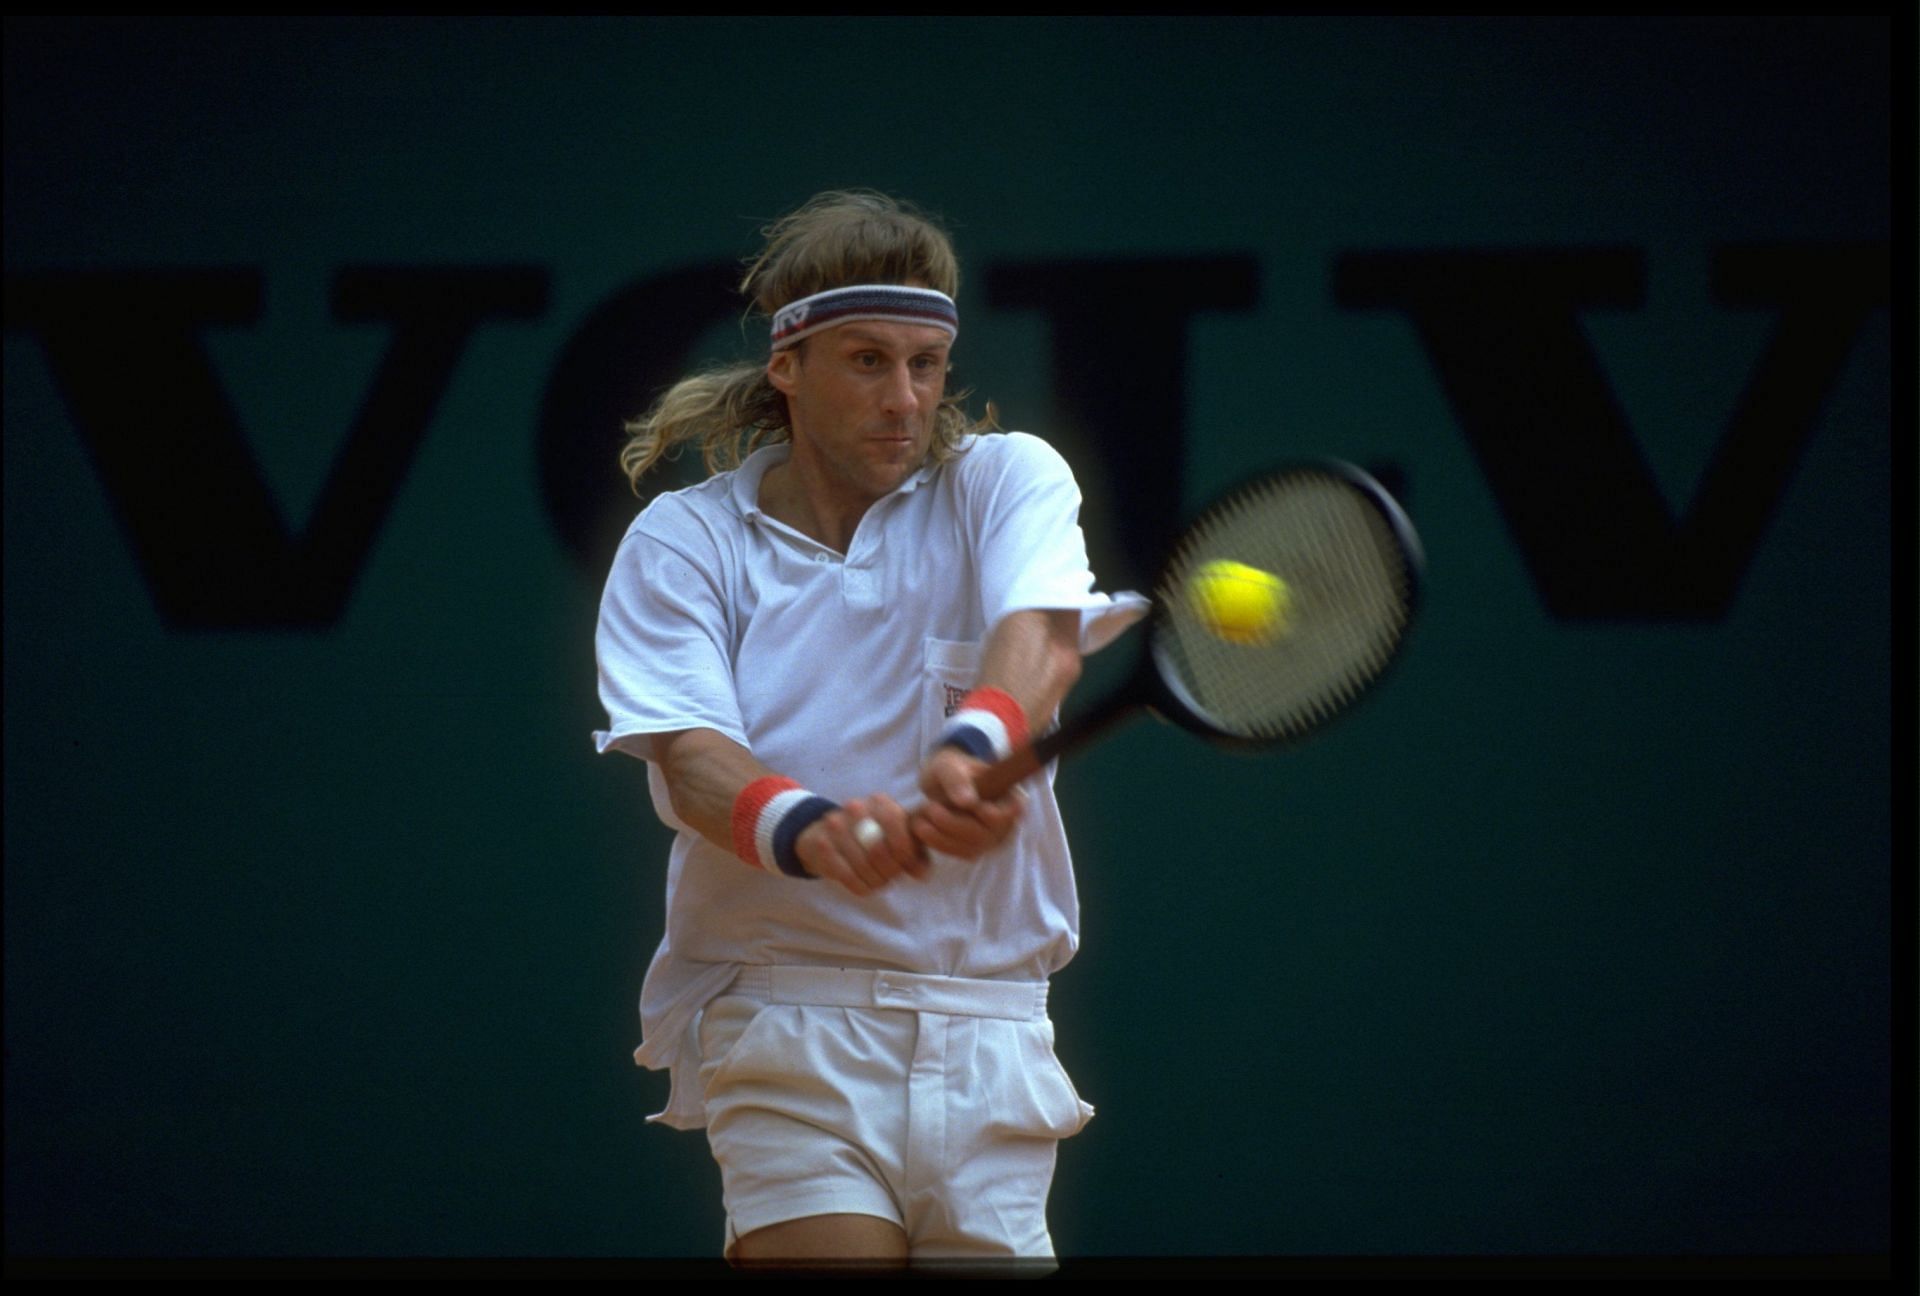 Borg in action wearing the Fila brand at the 1991 Monte Carlo Open